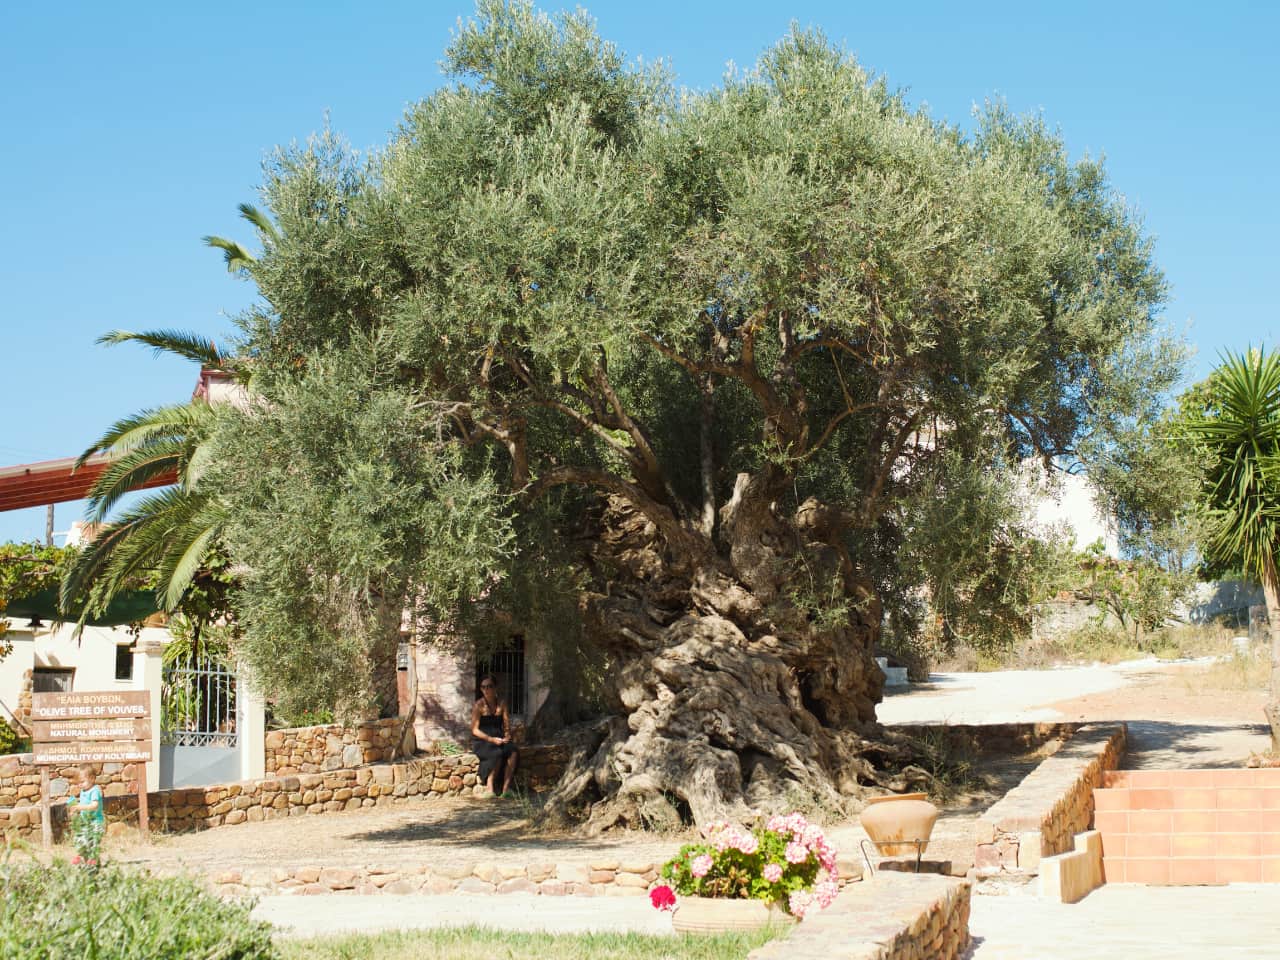 The Olive Tree Museum of Vouves, Monumental Olive Tree of Vouves, Pano Vouves olive museum, West Crete activities, best activities chania crete